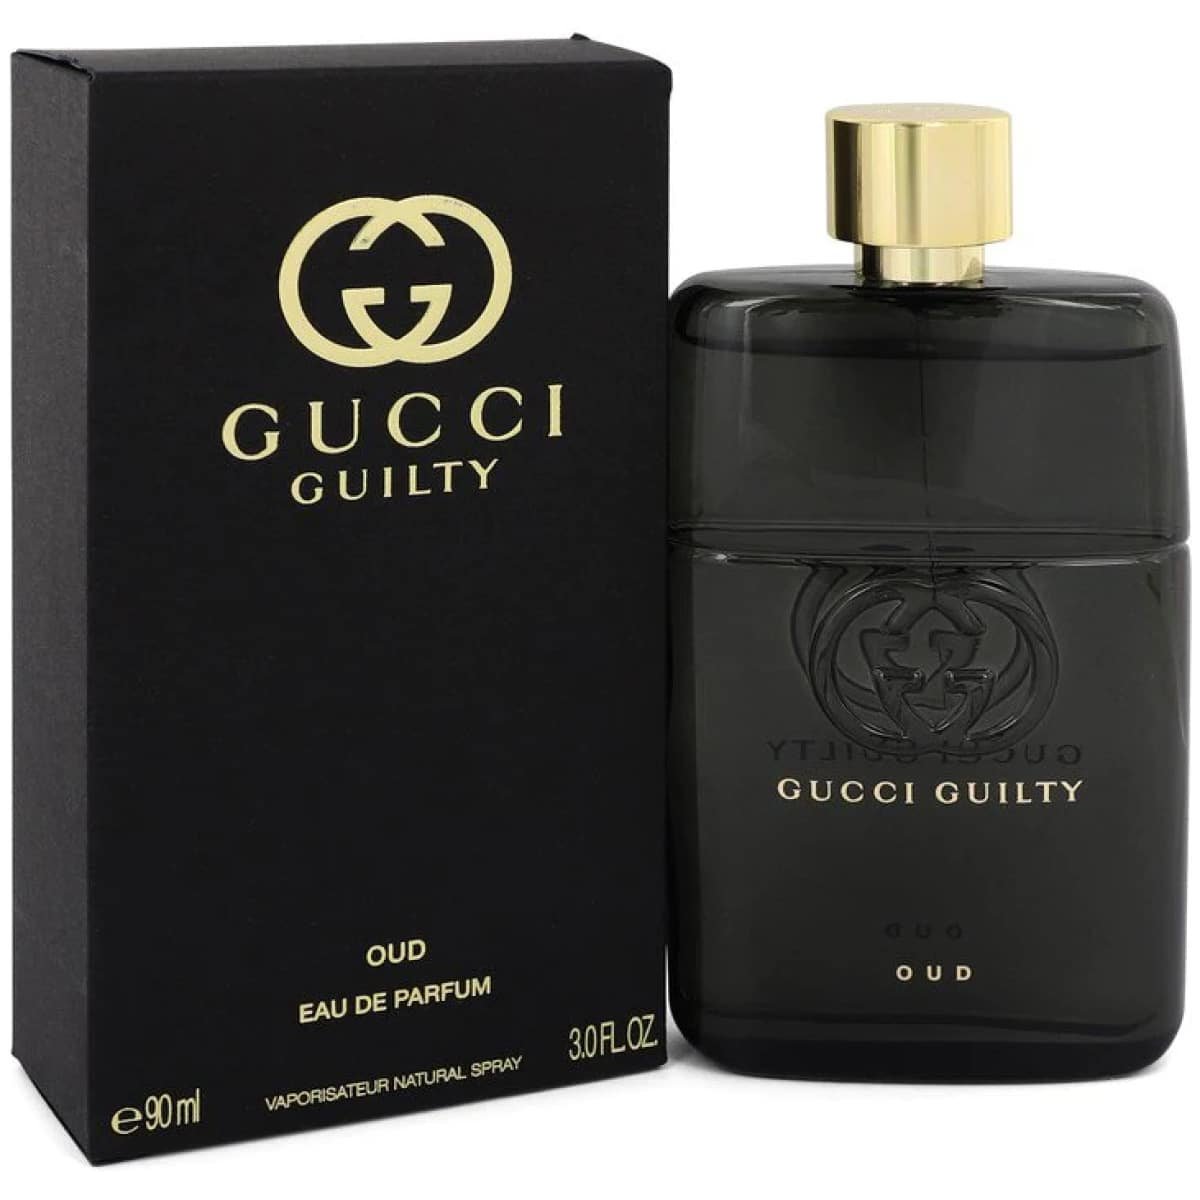 Gucci Guilty Oud EDP Perfume For Men And Women 90 ml